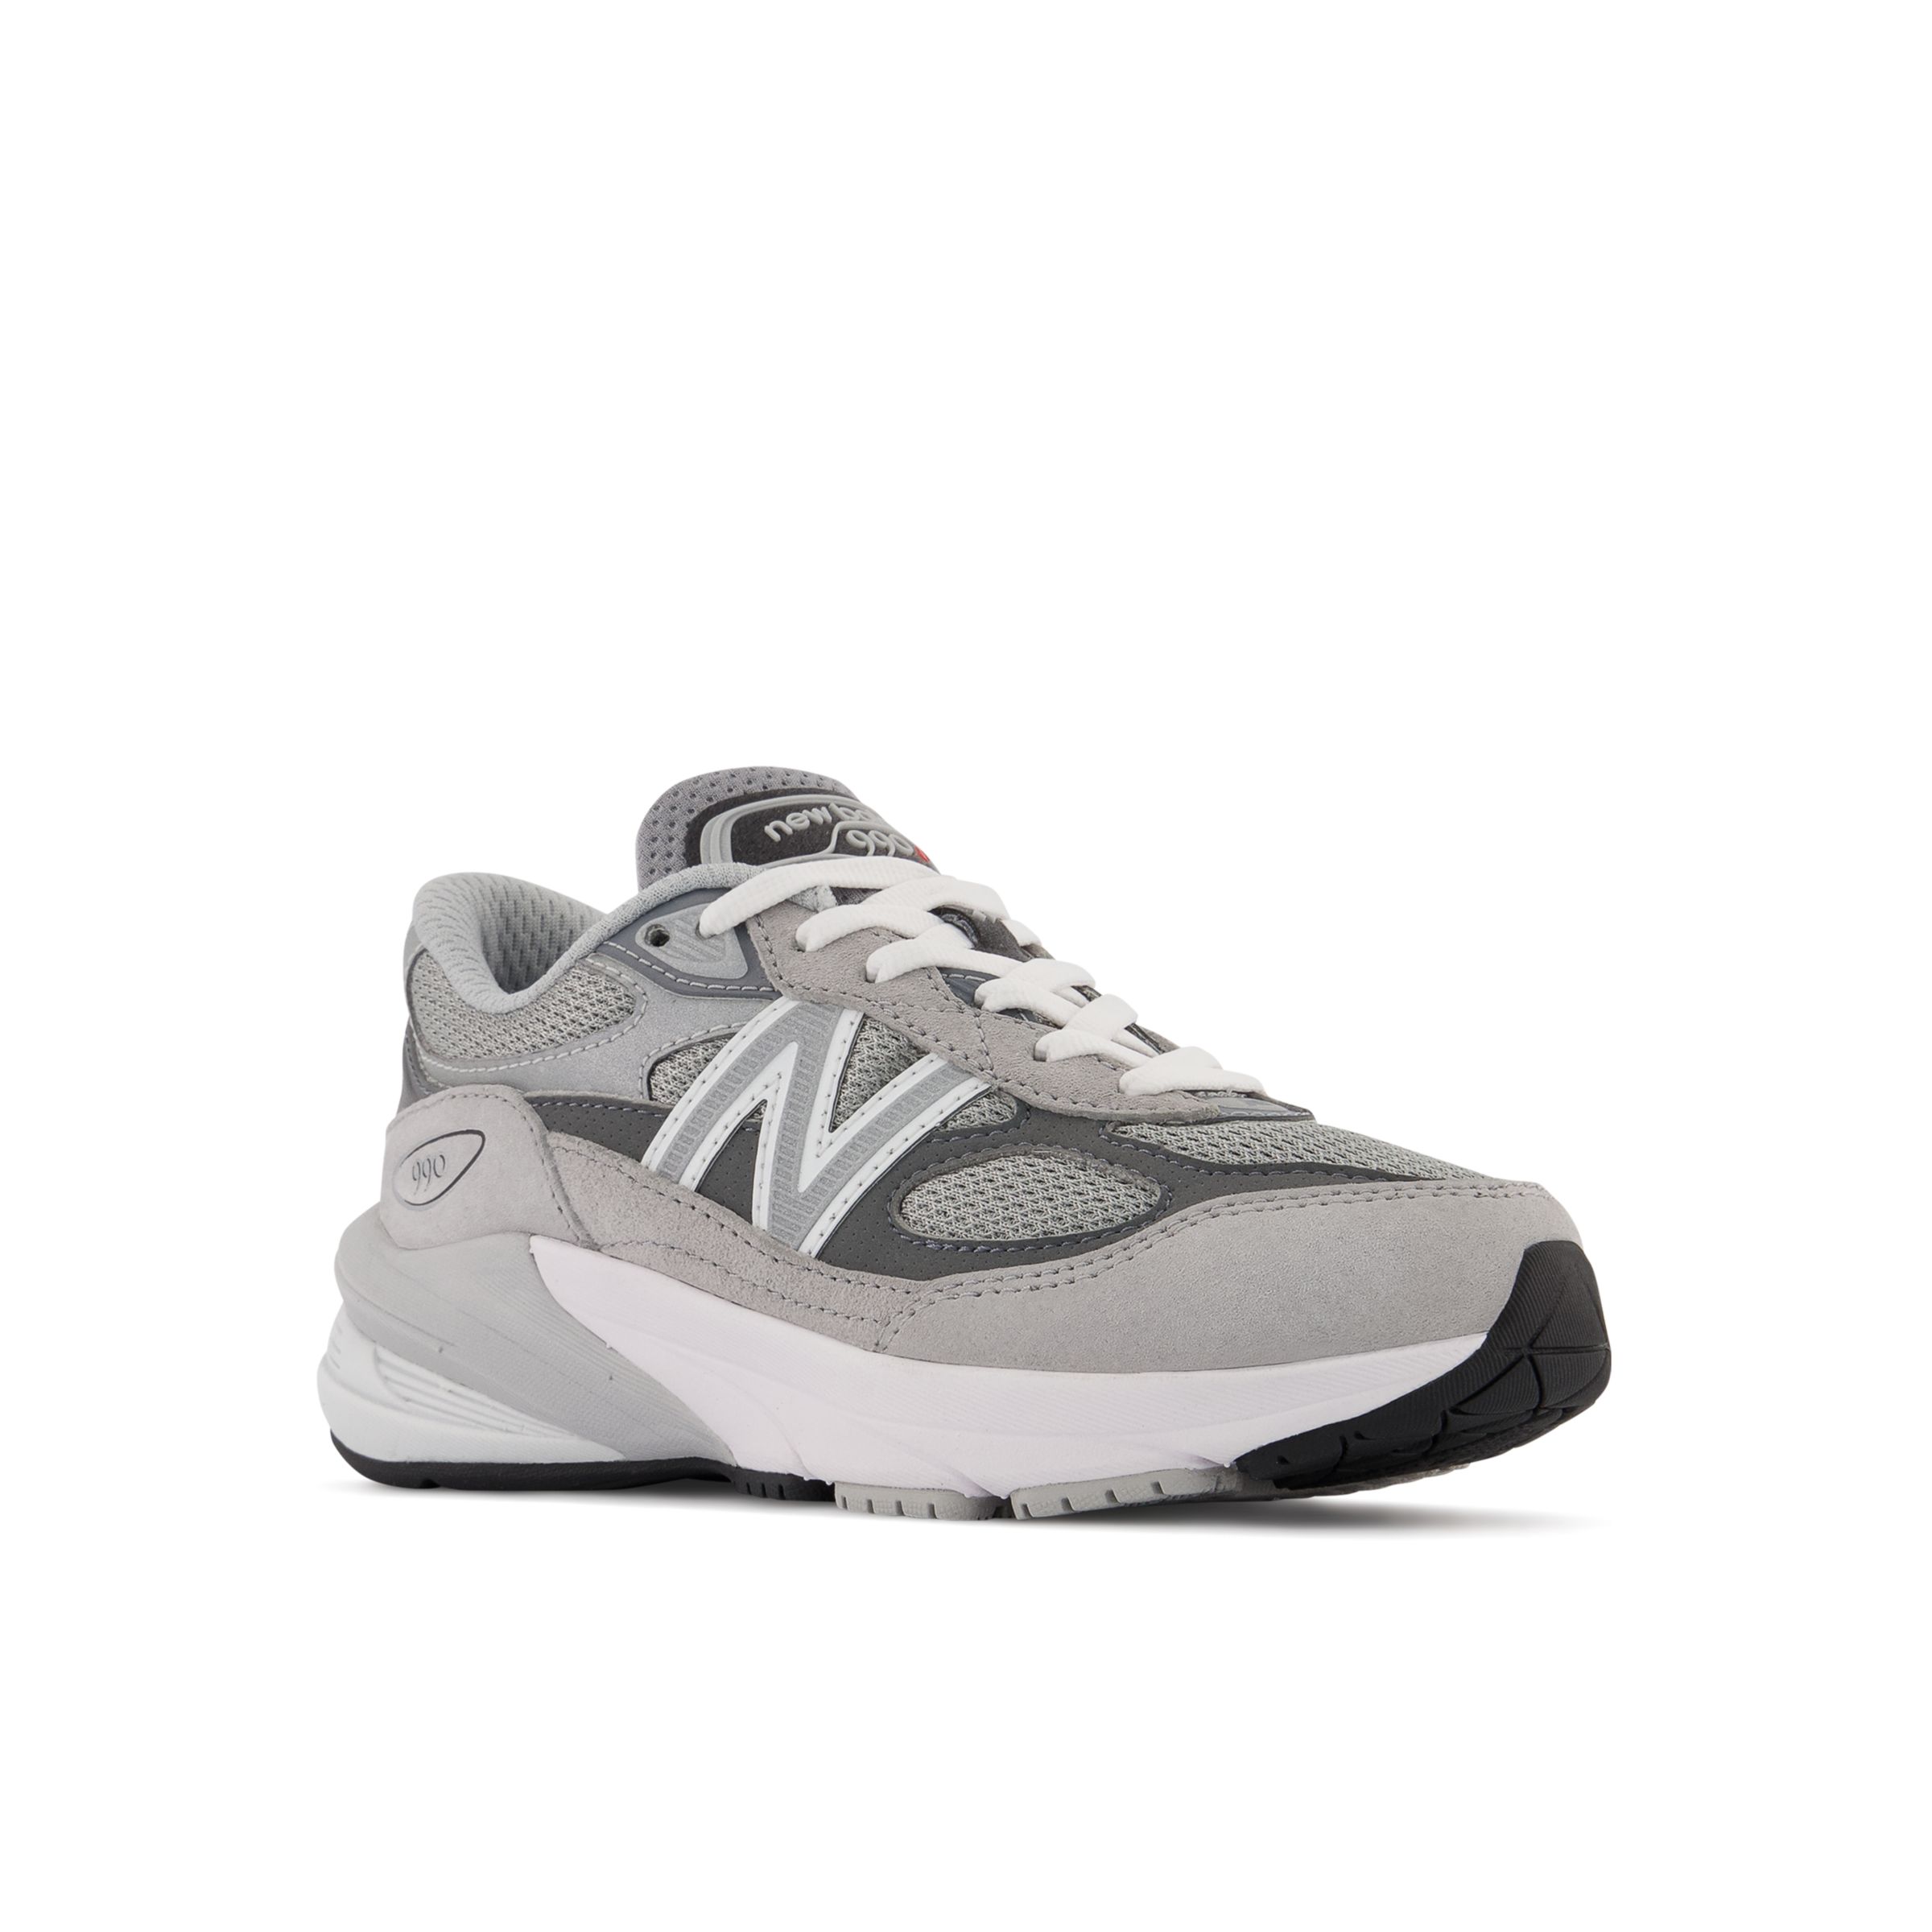 FuelCell 990v6 - New Balance